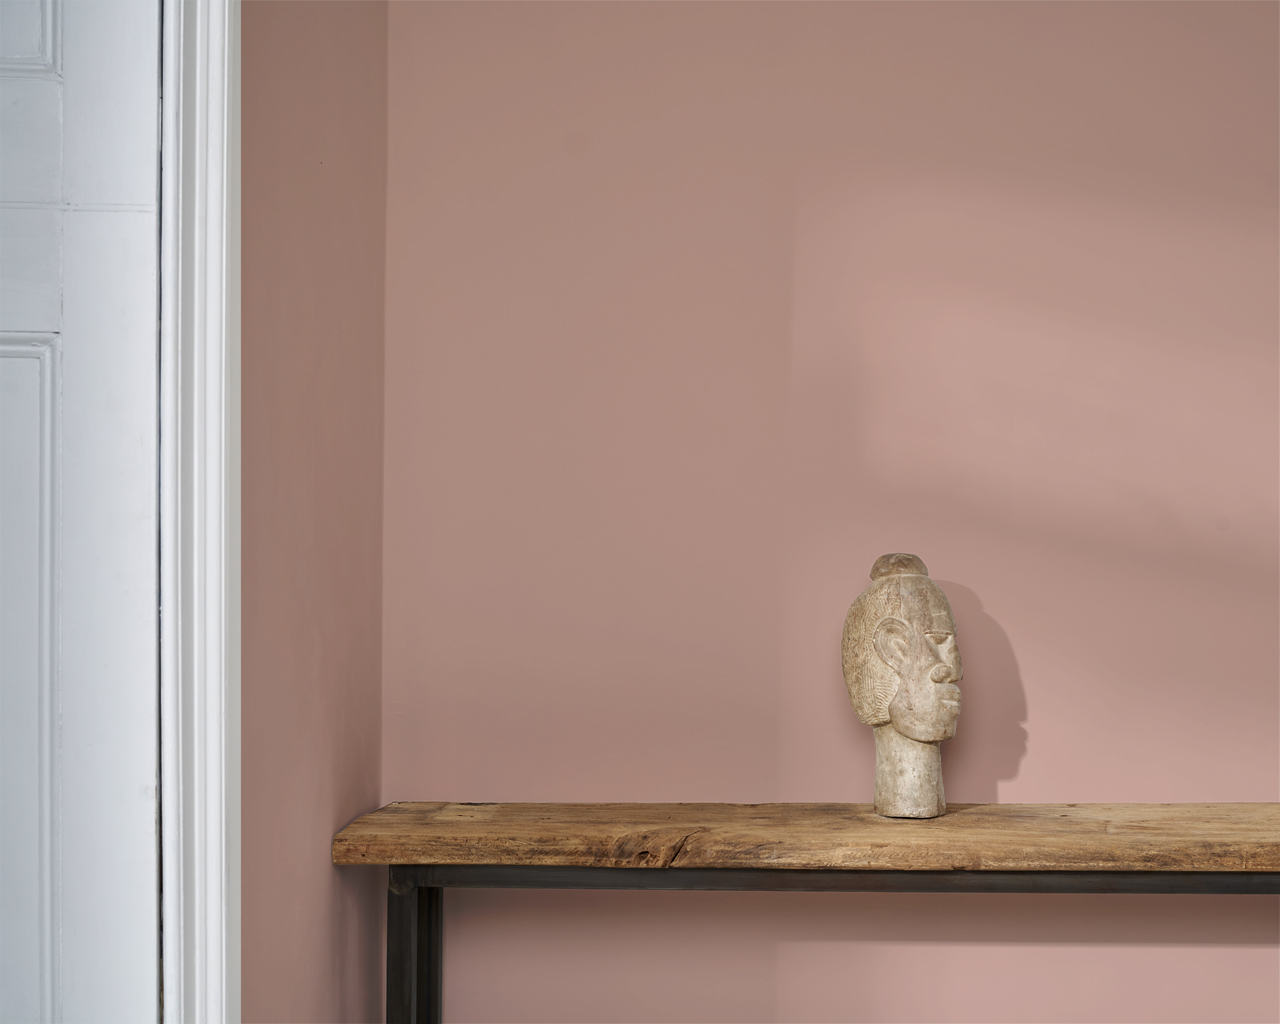 Annie Sloan Wall Paint in Piranesi Pink with Head Sculpture